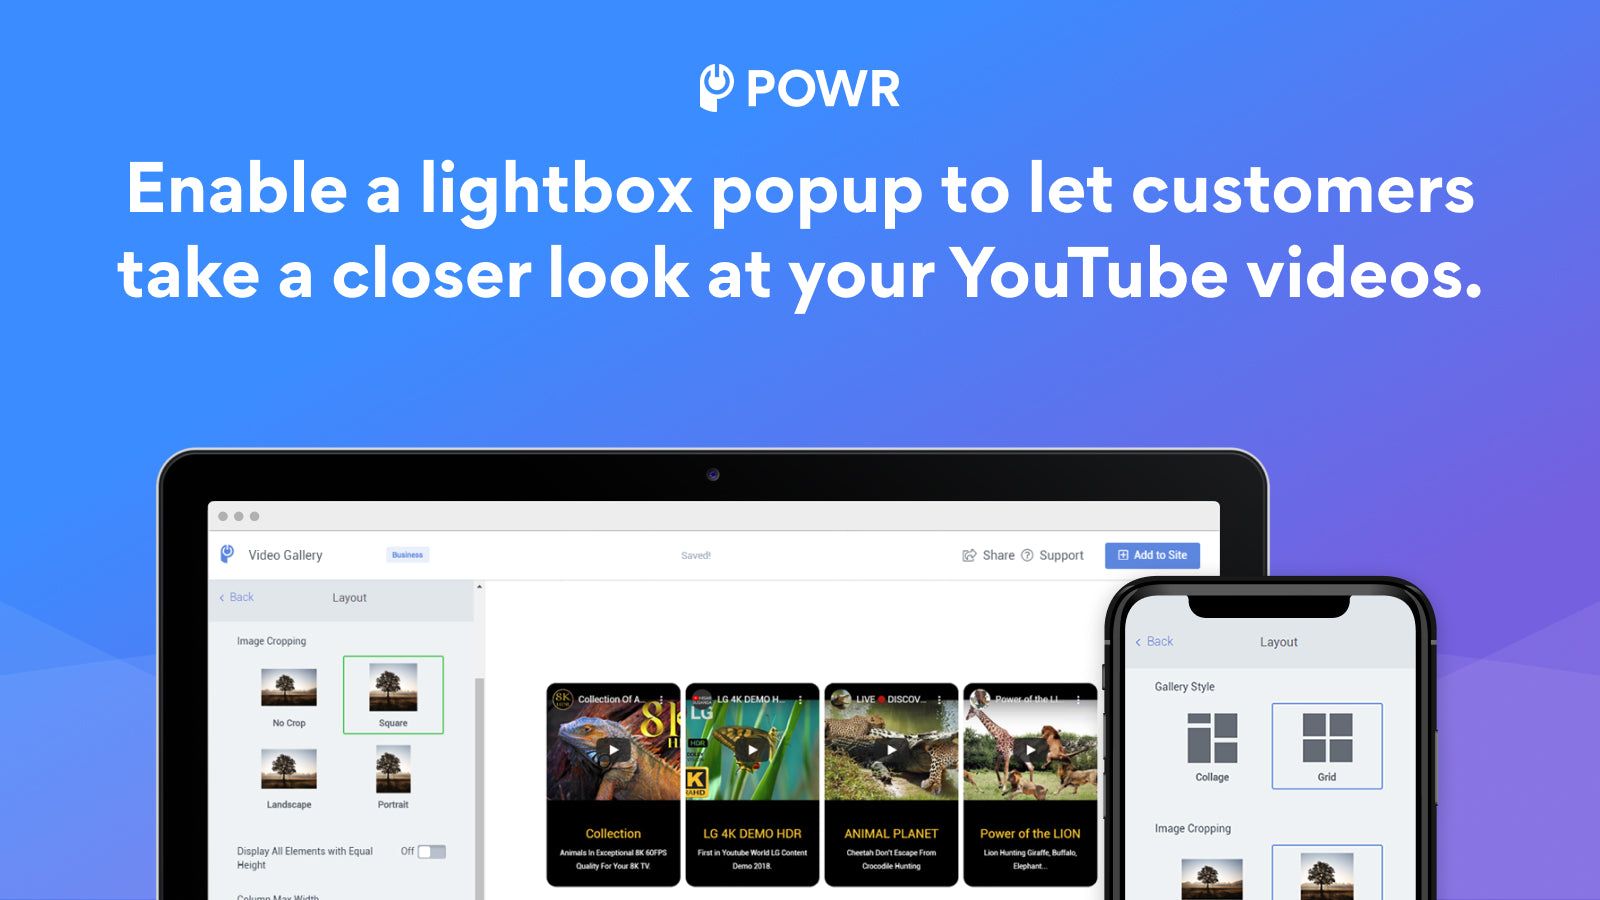 Enable a lightbox popup to let customers take a closer look.